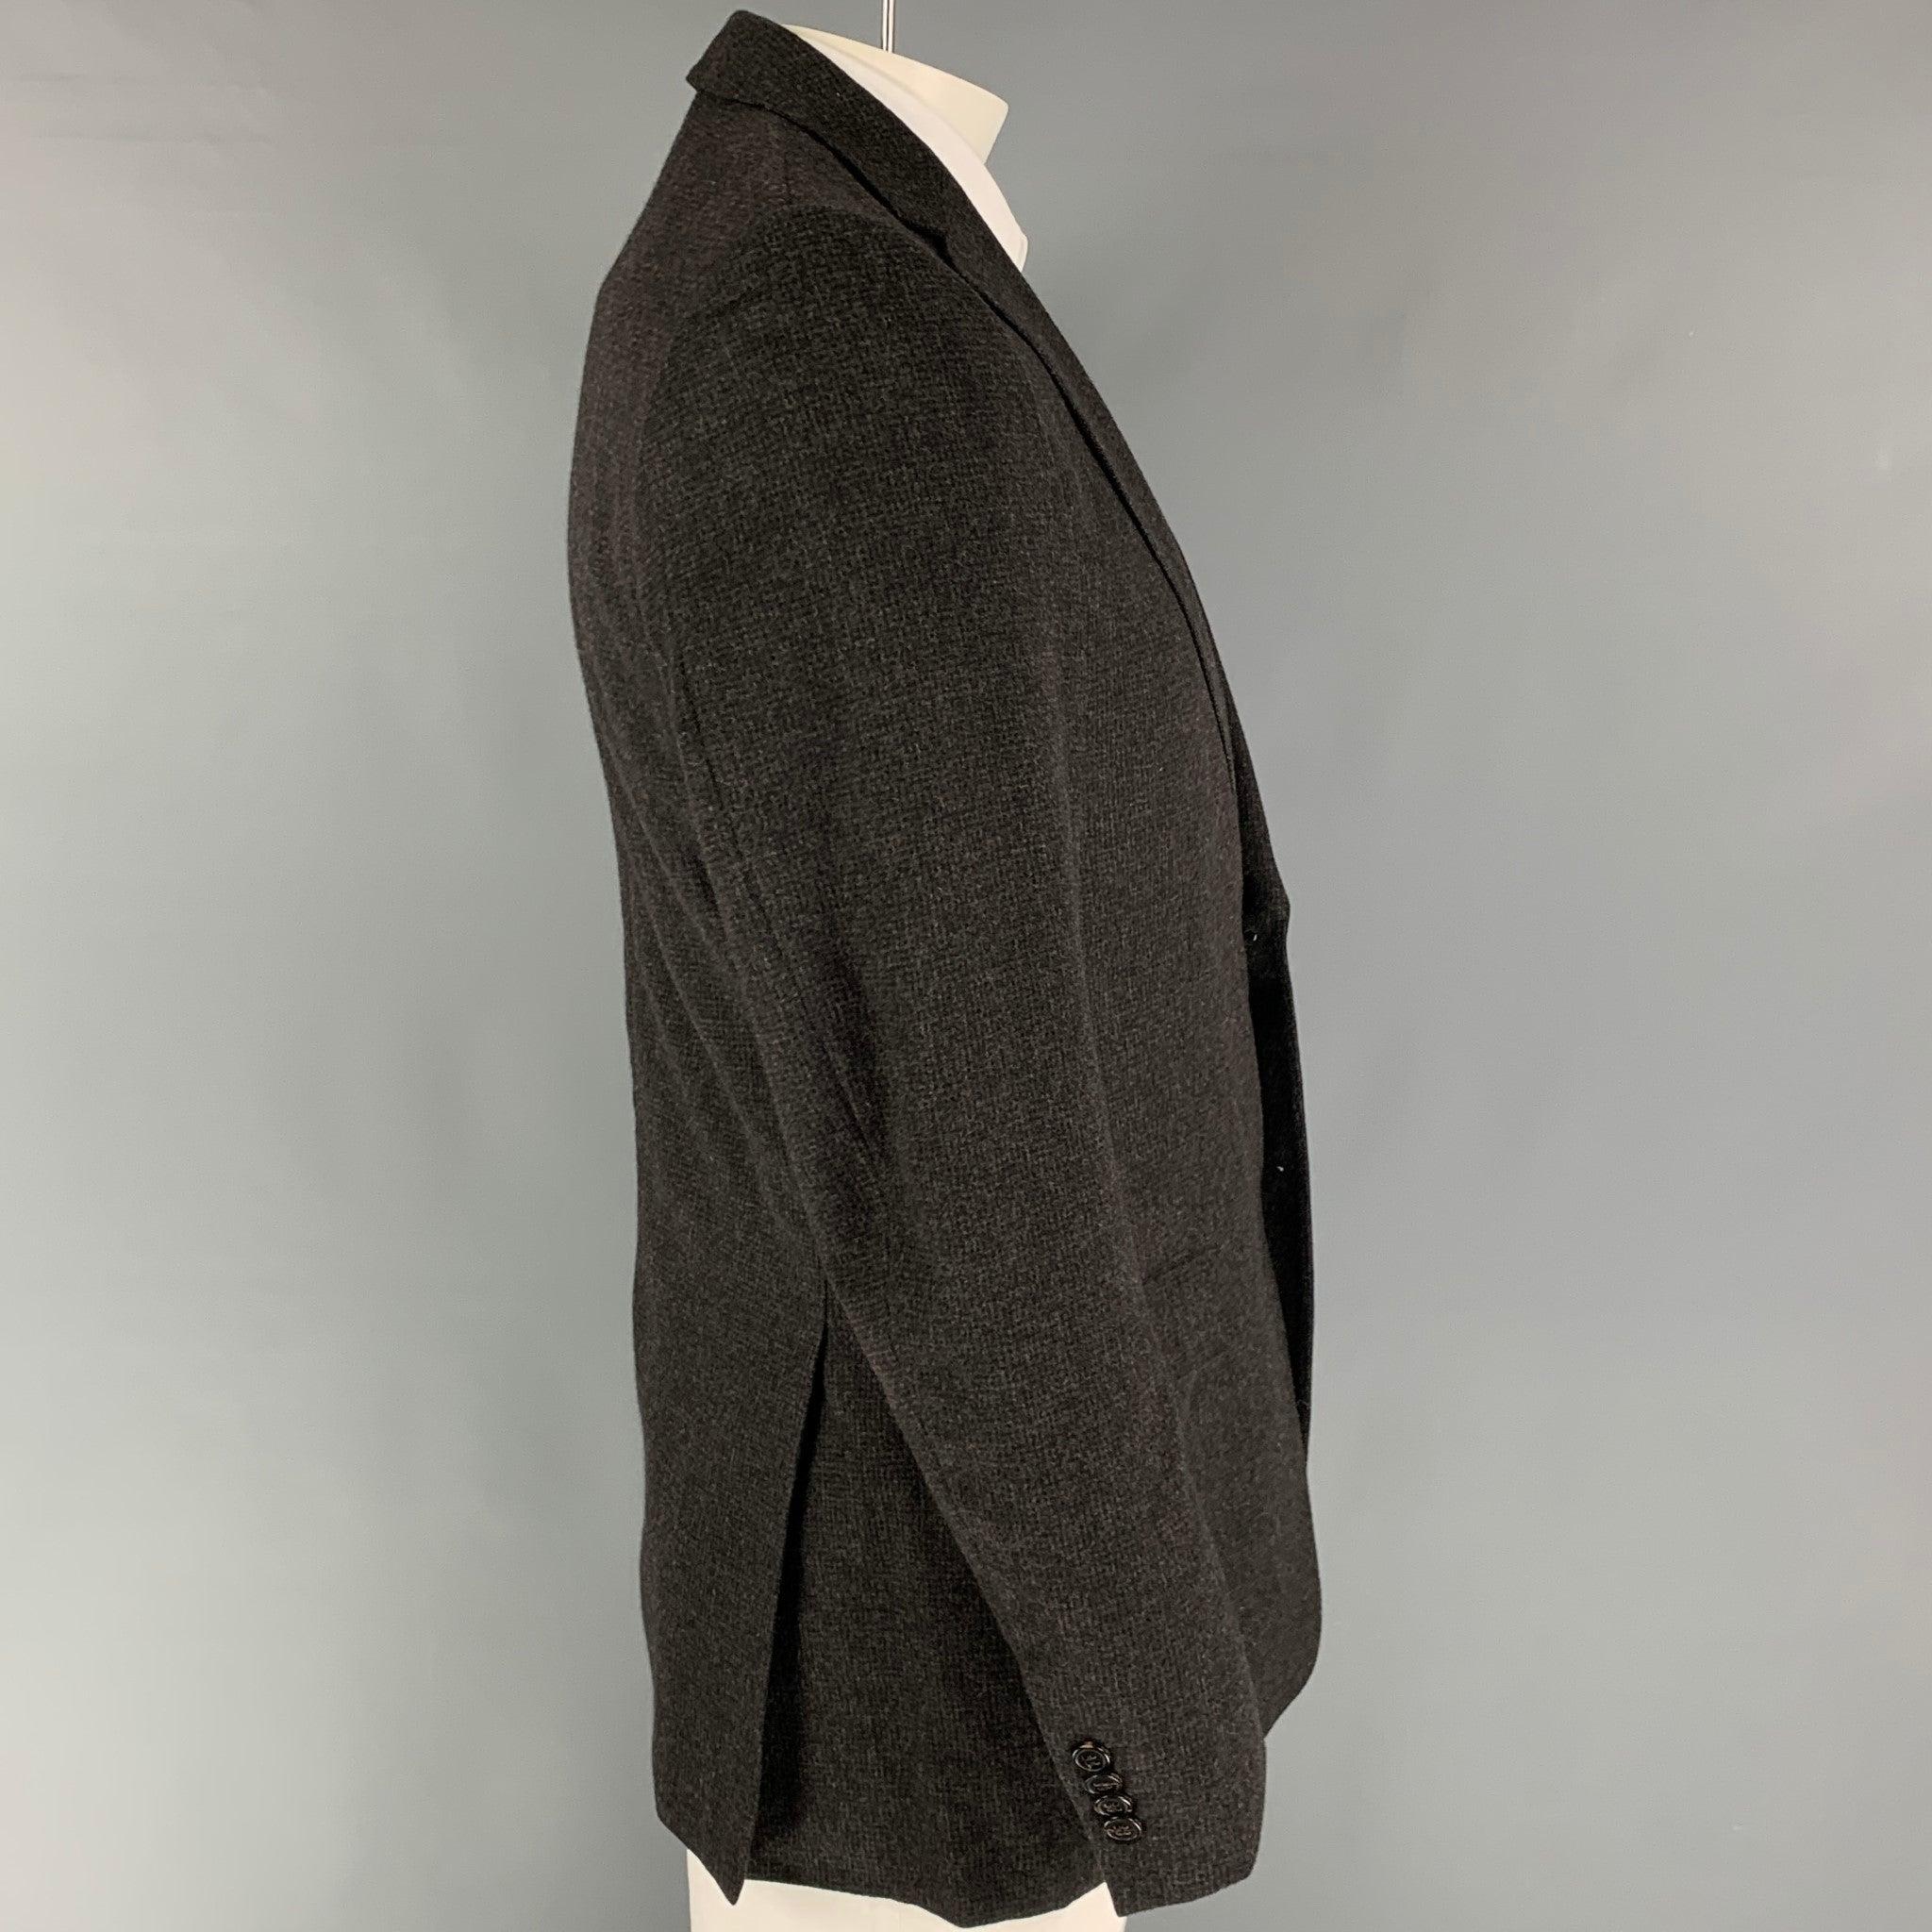 Z ZEGNA sport coat comes in a charcoal & grey grid wool / angora with a full liner featuring a notch lapel, flap pockets, double back vent, and a double button closure.
Very Good
Pre-Owned Condition. Missing one button.  

Marked:   50 L 